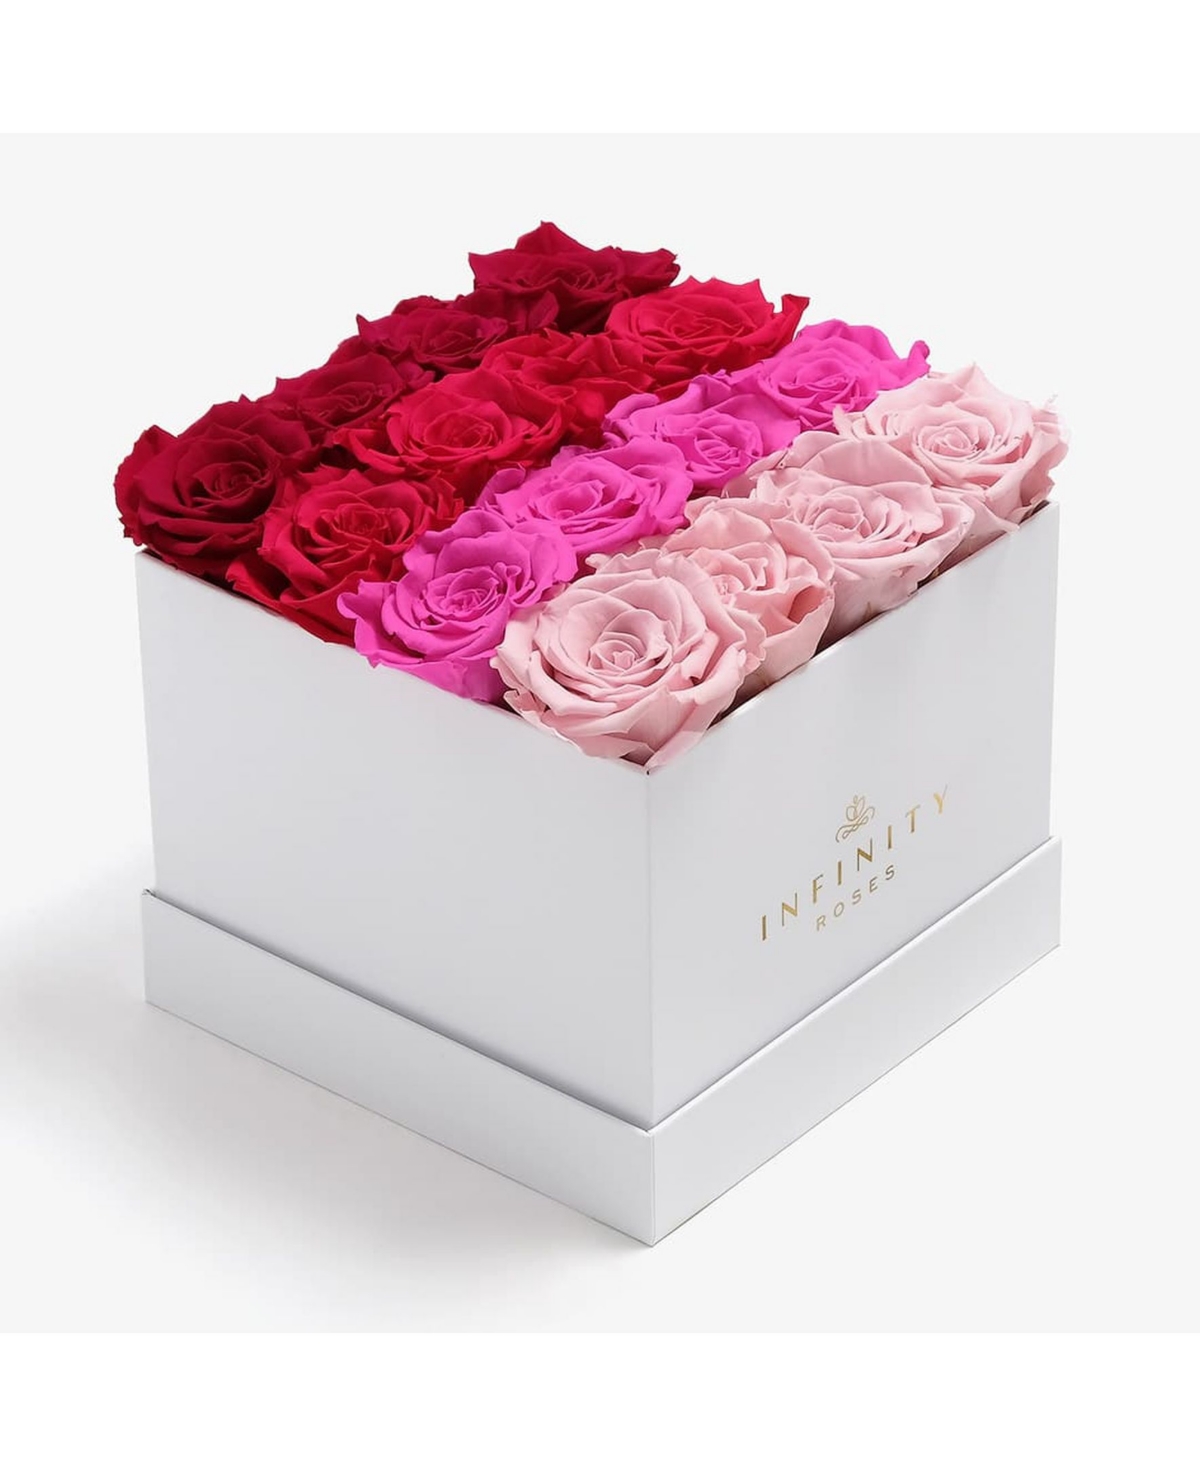 Square Box of 16 Pink Ombre Real Roses Preserved To Last Over A Year - Pink